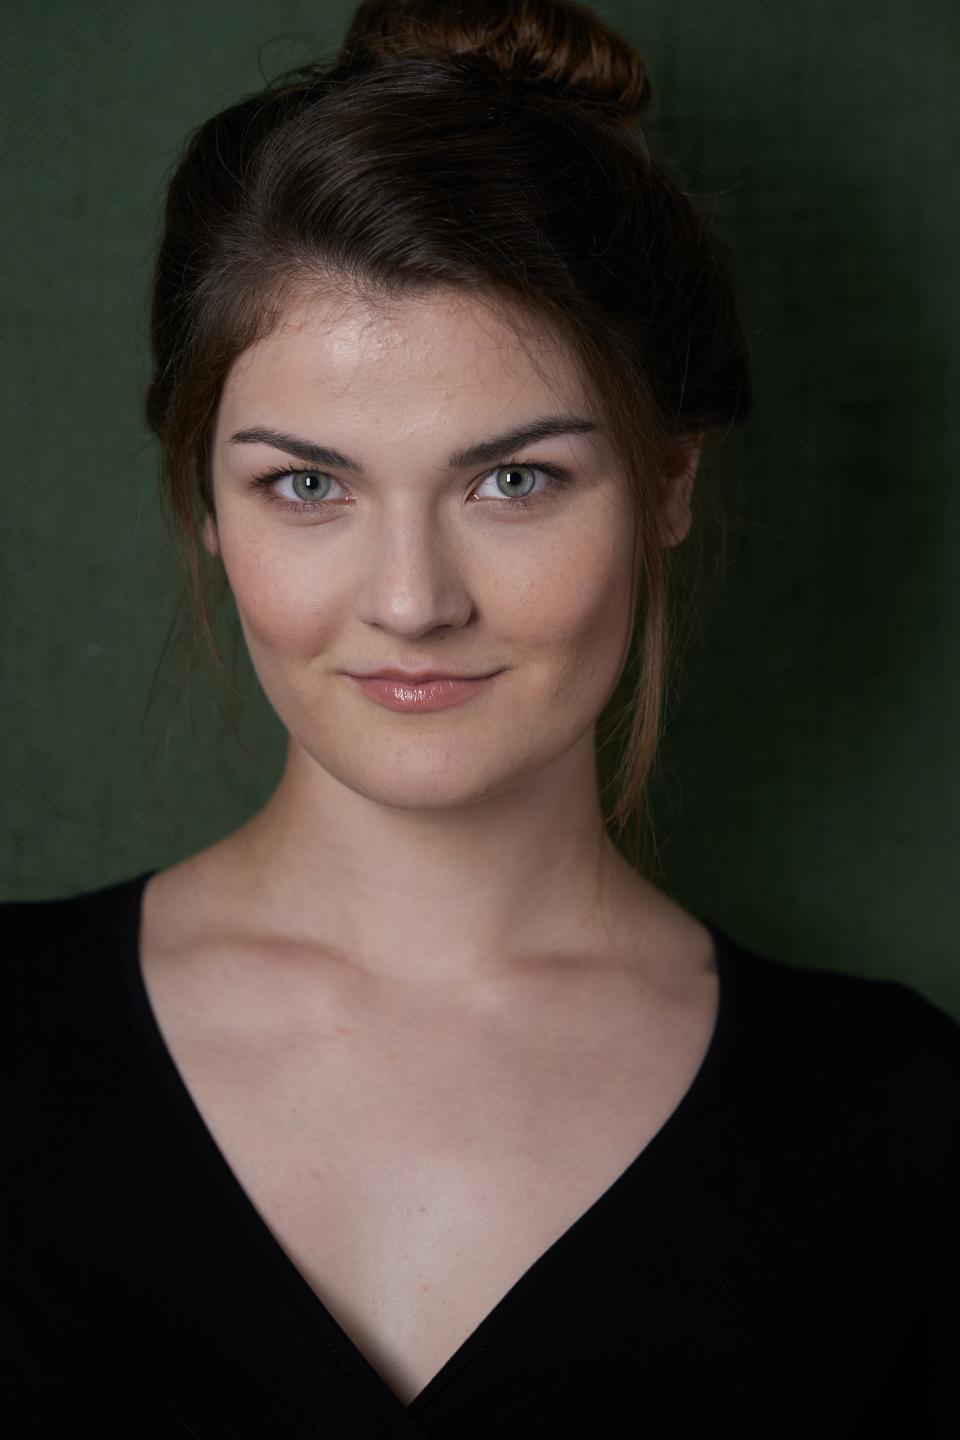 Newcomer Caroline Dopson will play the role of Isabella in the Palm Beach Shakespeare Festival's production of "Measure for Measure."